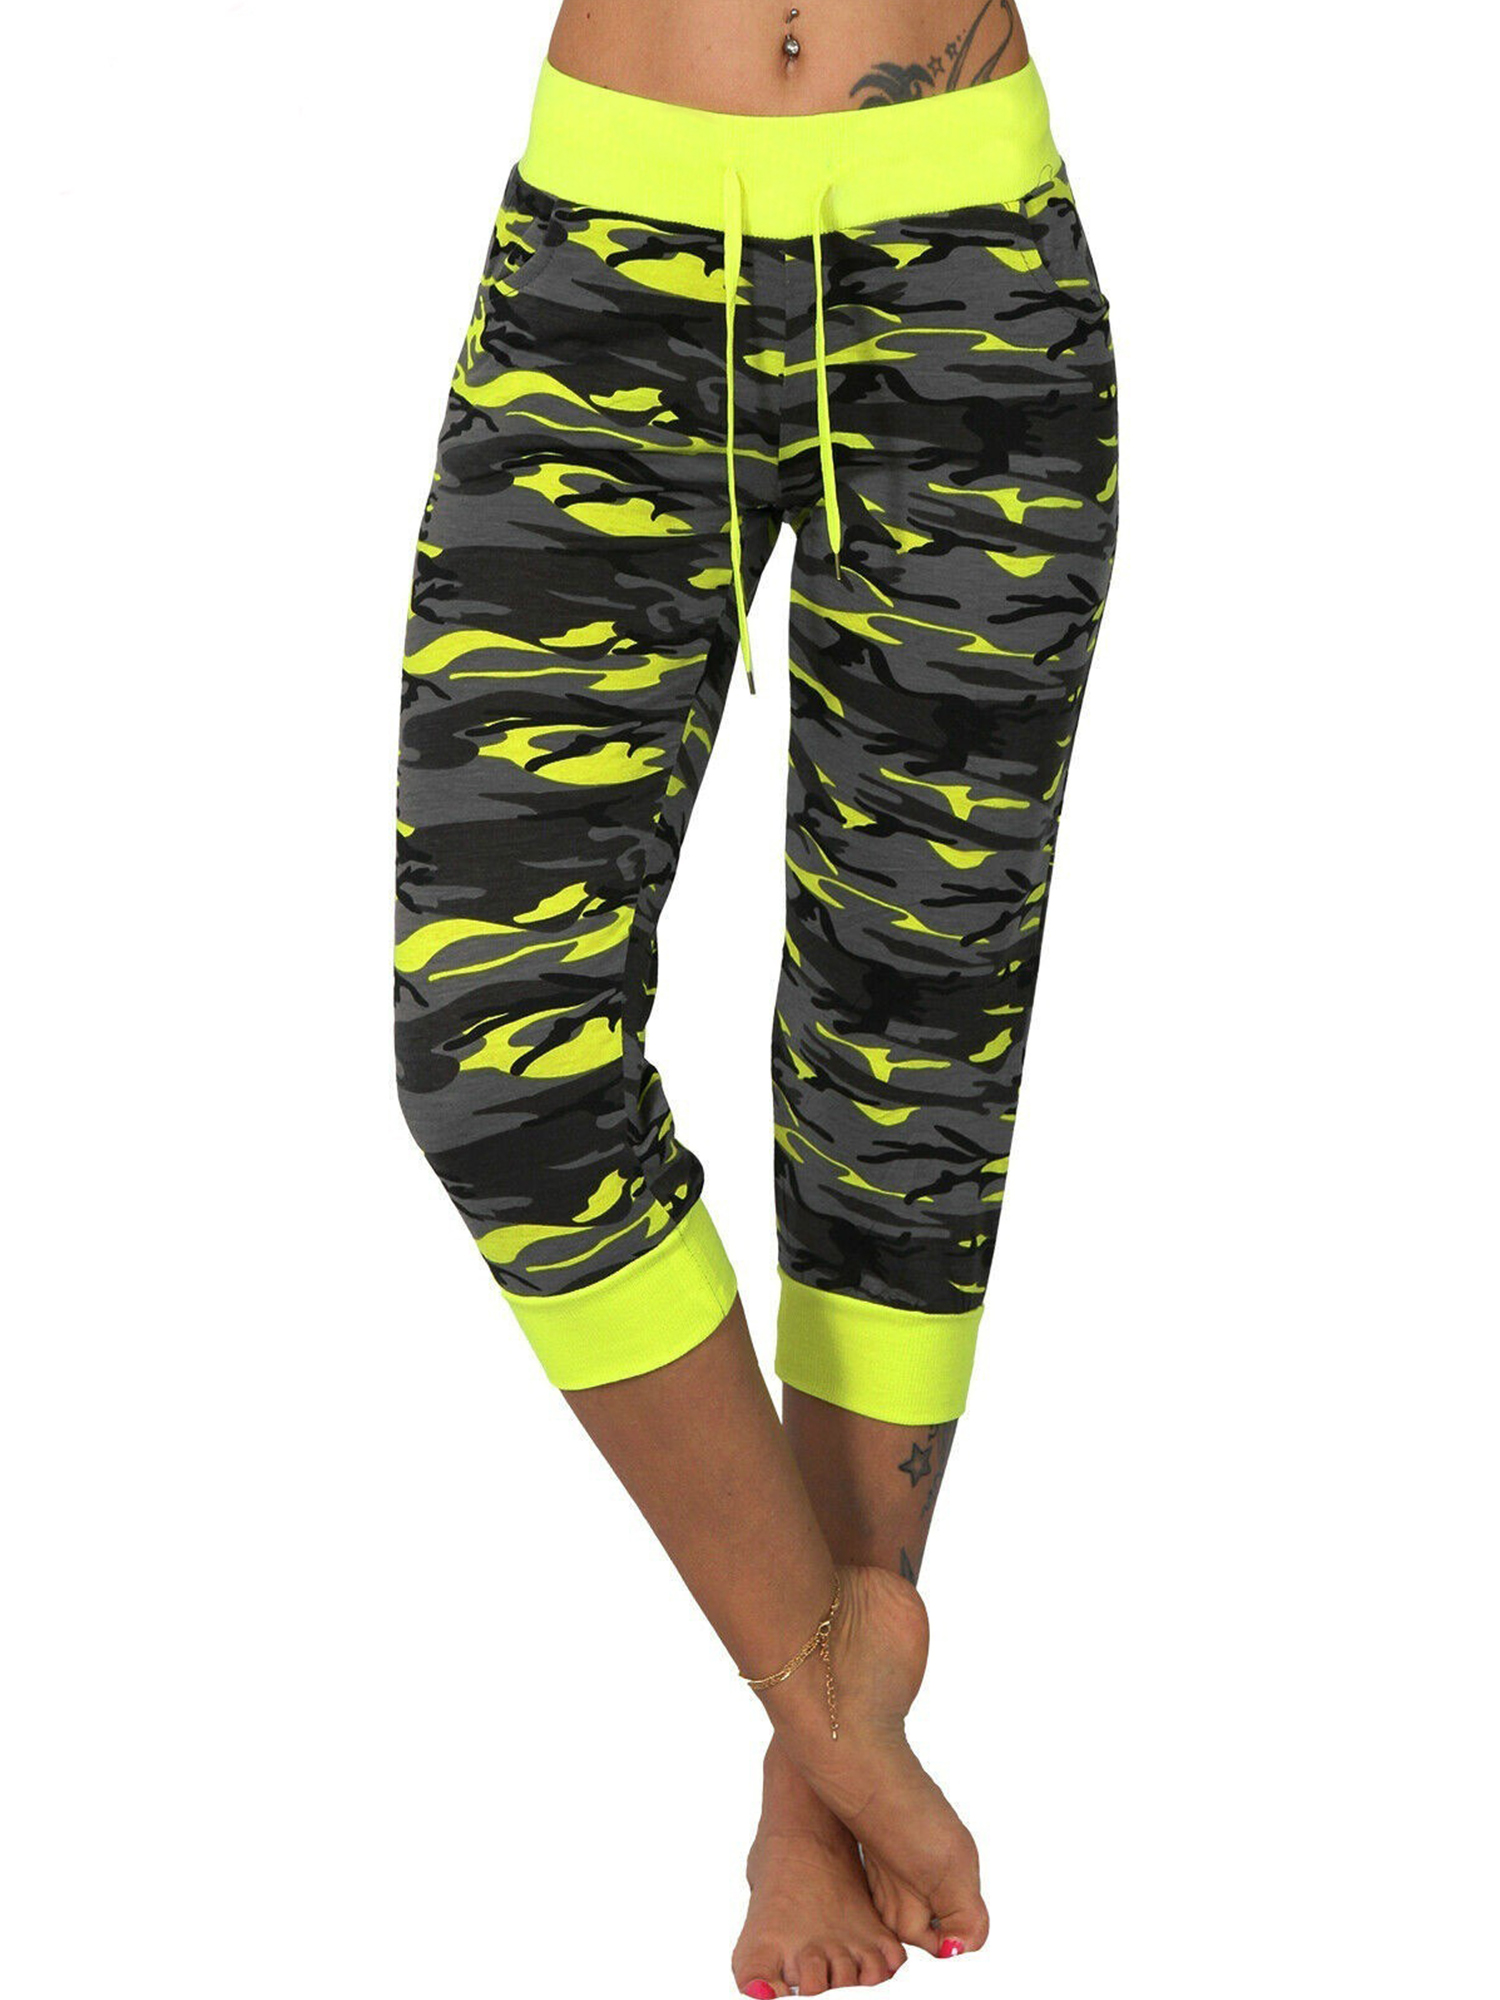 (2 Packs) Juniors' Plus Size Camo Sports Yoga Crop Jeggings High Waist Tummy Control Oversized Camouflage Pants - image 3 of 5